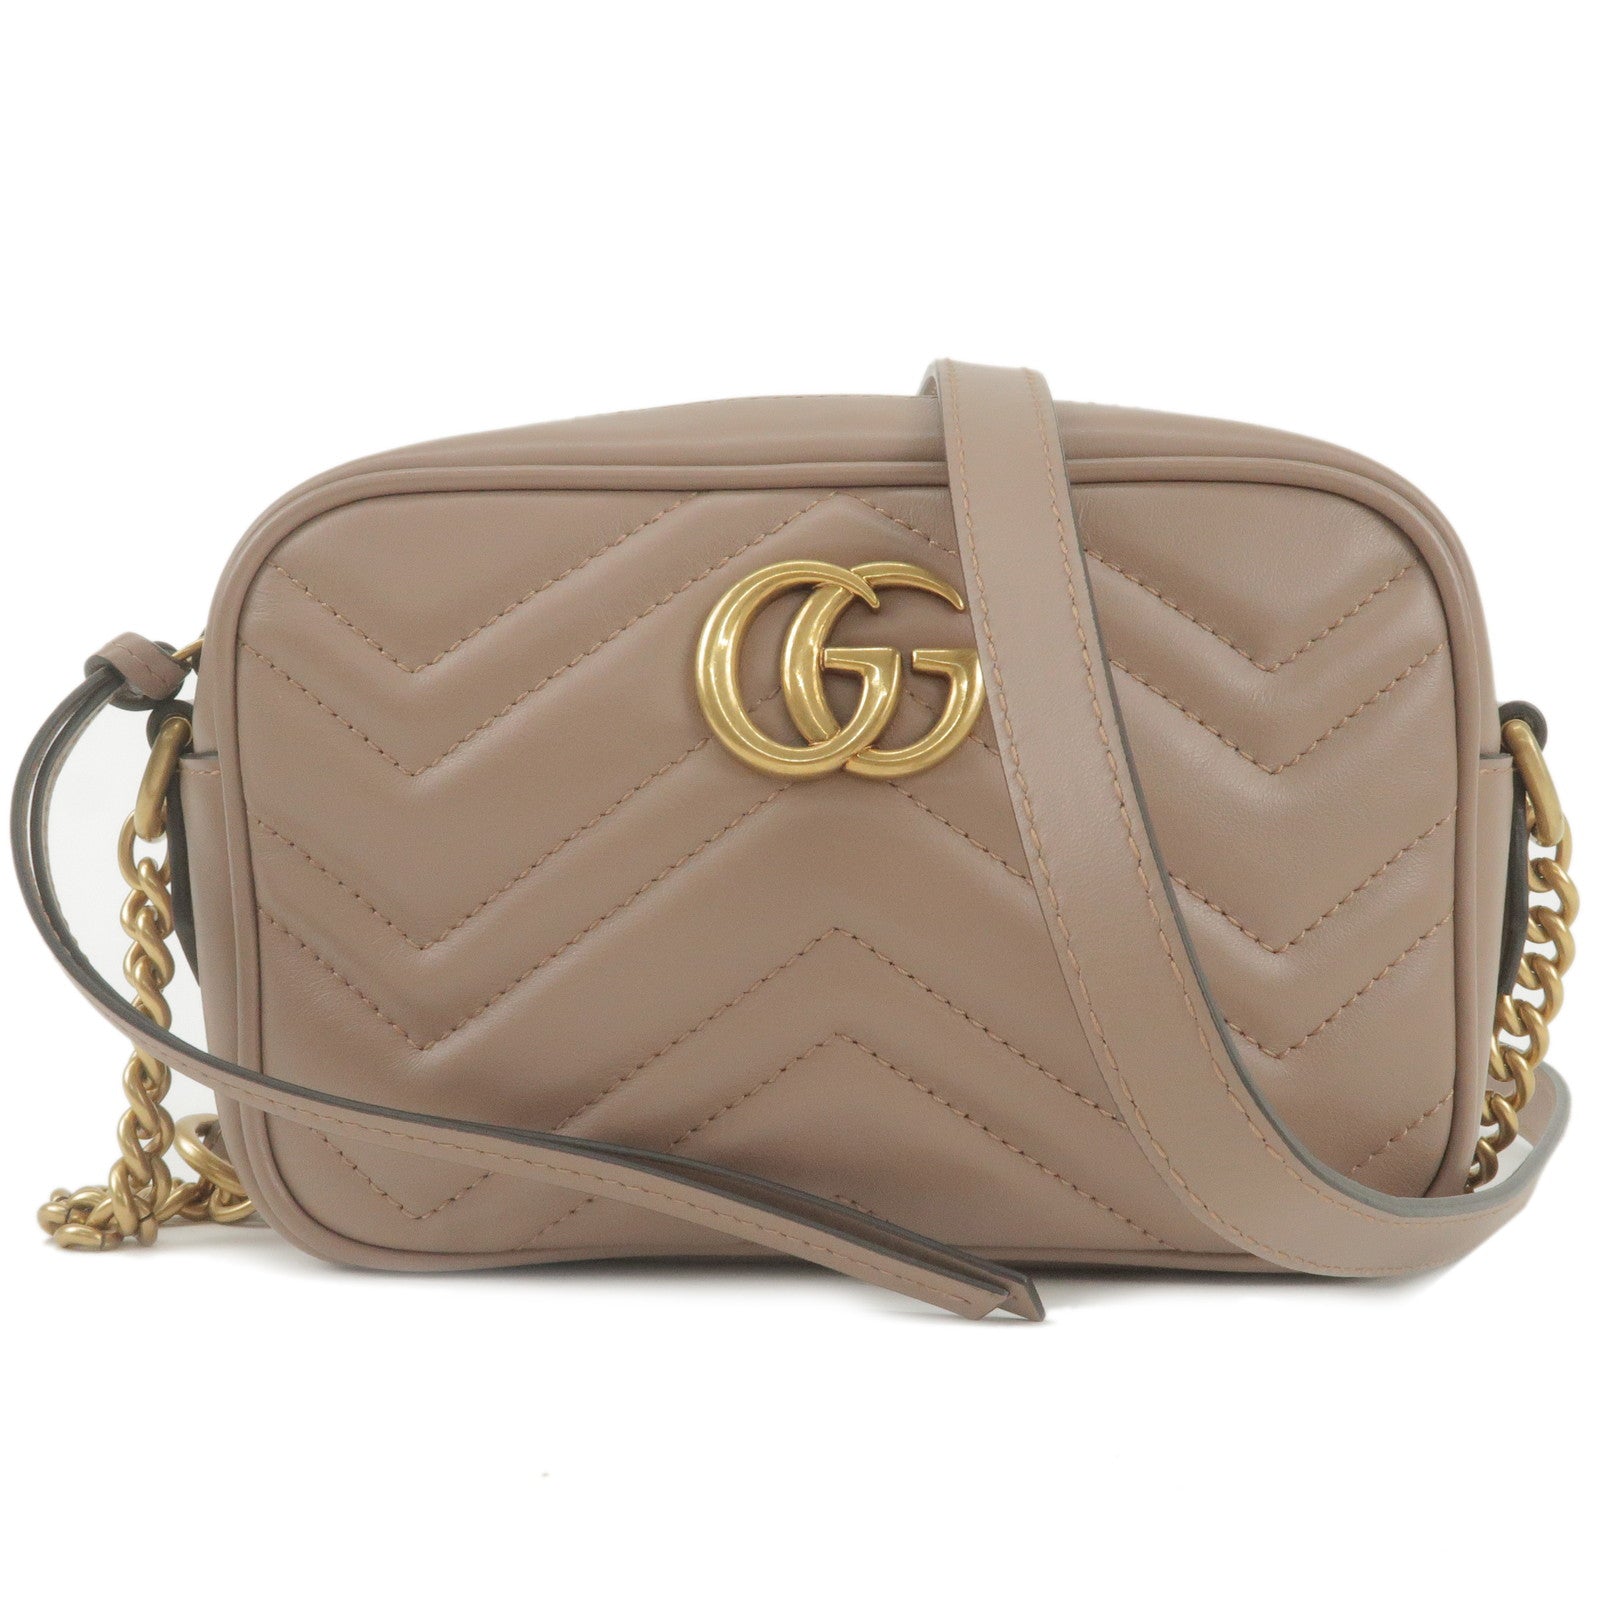 GUCCI-GG-Marmont-Leather-Chain-Shoulder-Bag-Beige-448065